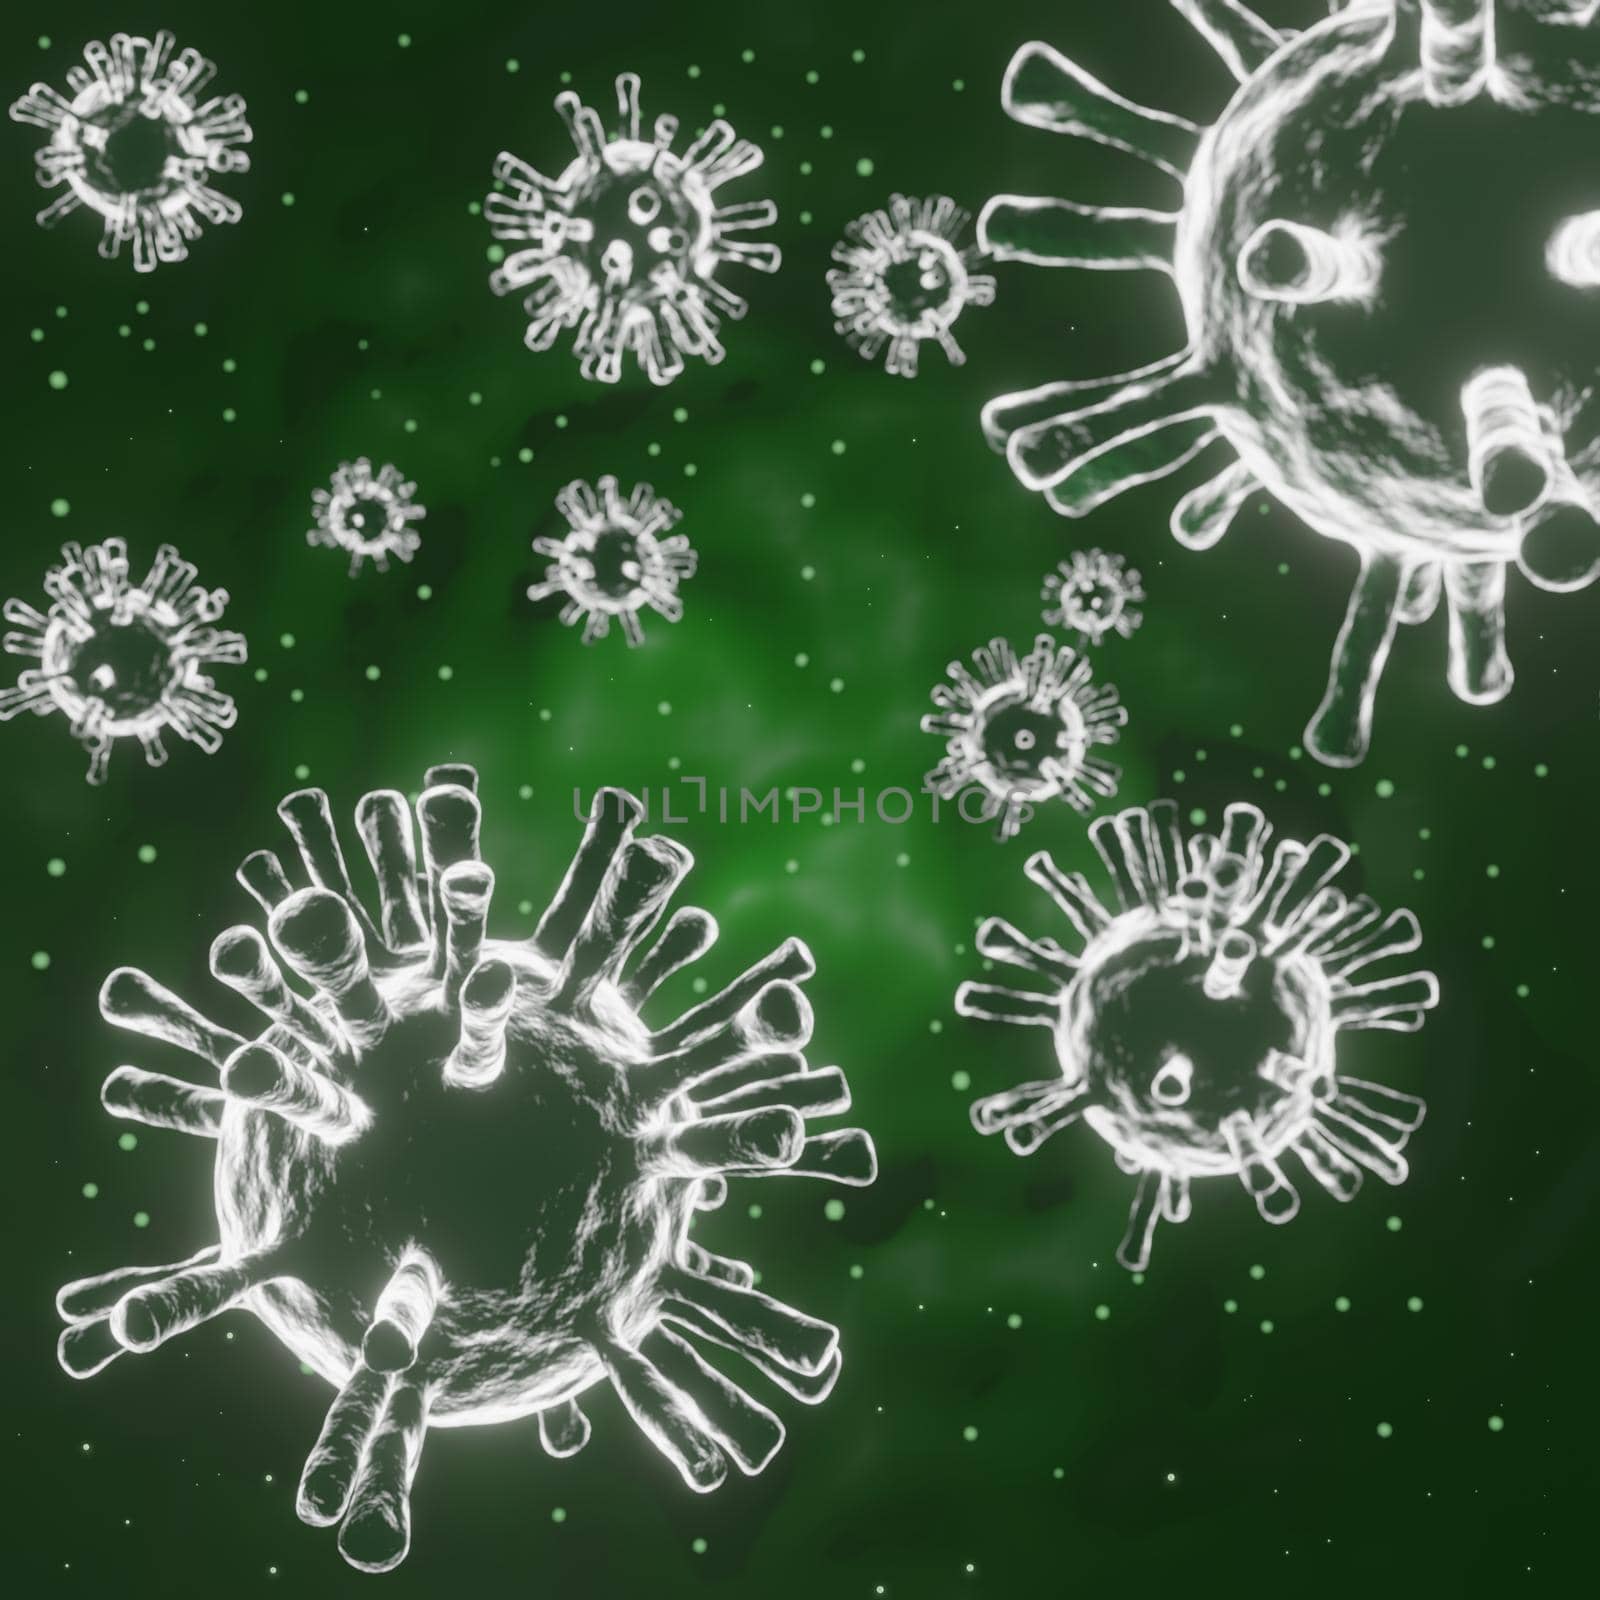 Abstract Corona Virus 19 Microscopic Particles Spreading research ideas for the coronavirus 2019 that is spreading heavily all over the world 3d rendering.